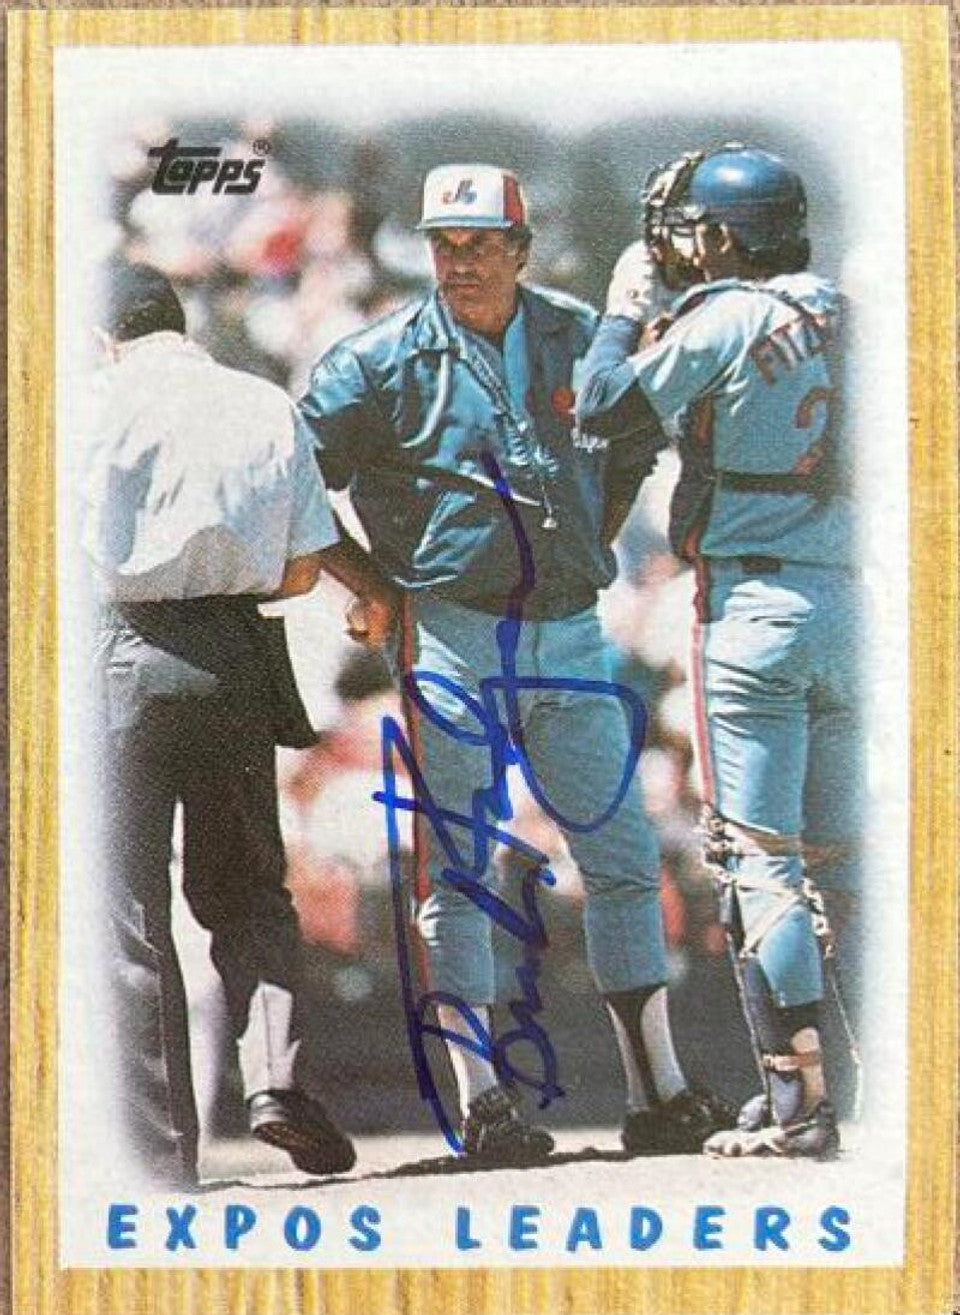 Bob "Buck" Rodgers Signed 1987 Topps Leaders Baseball Card - Montreal Expos